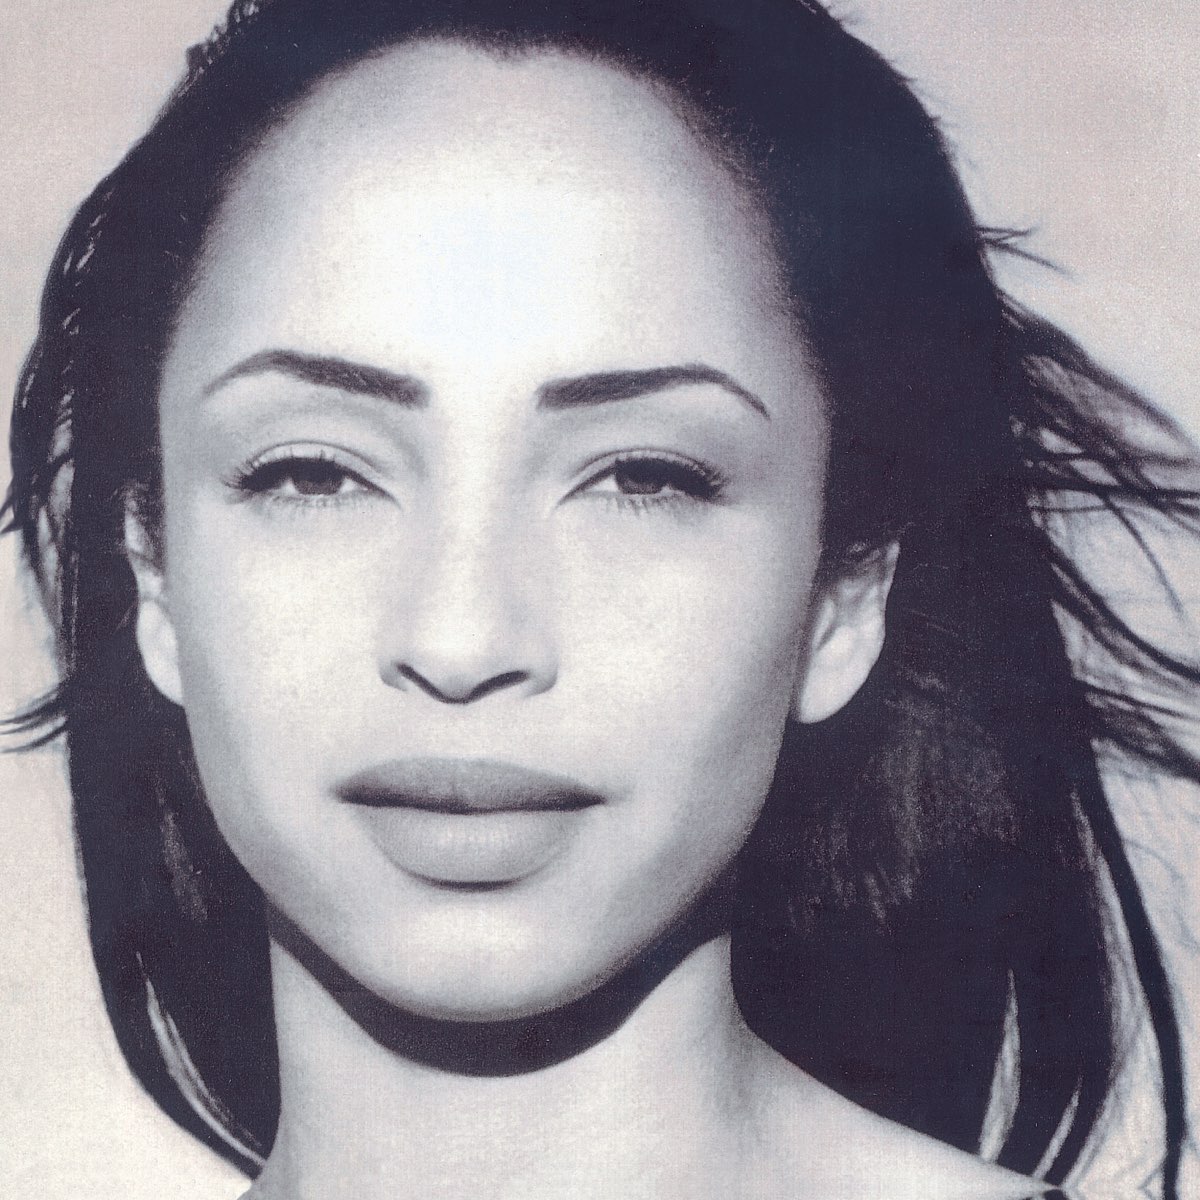 The Best of Sade by Sade on Apple Music